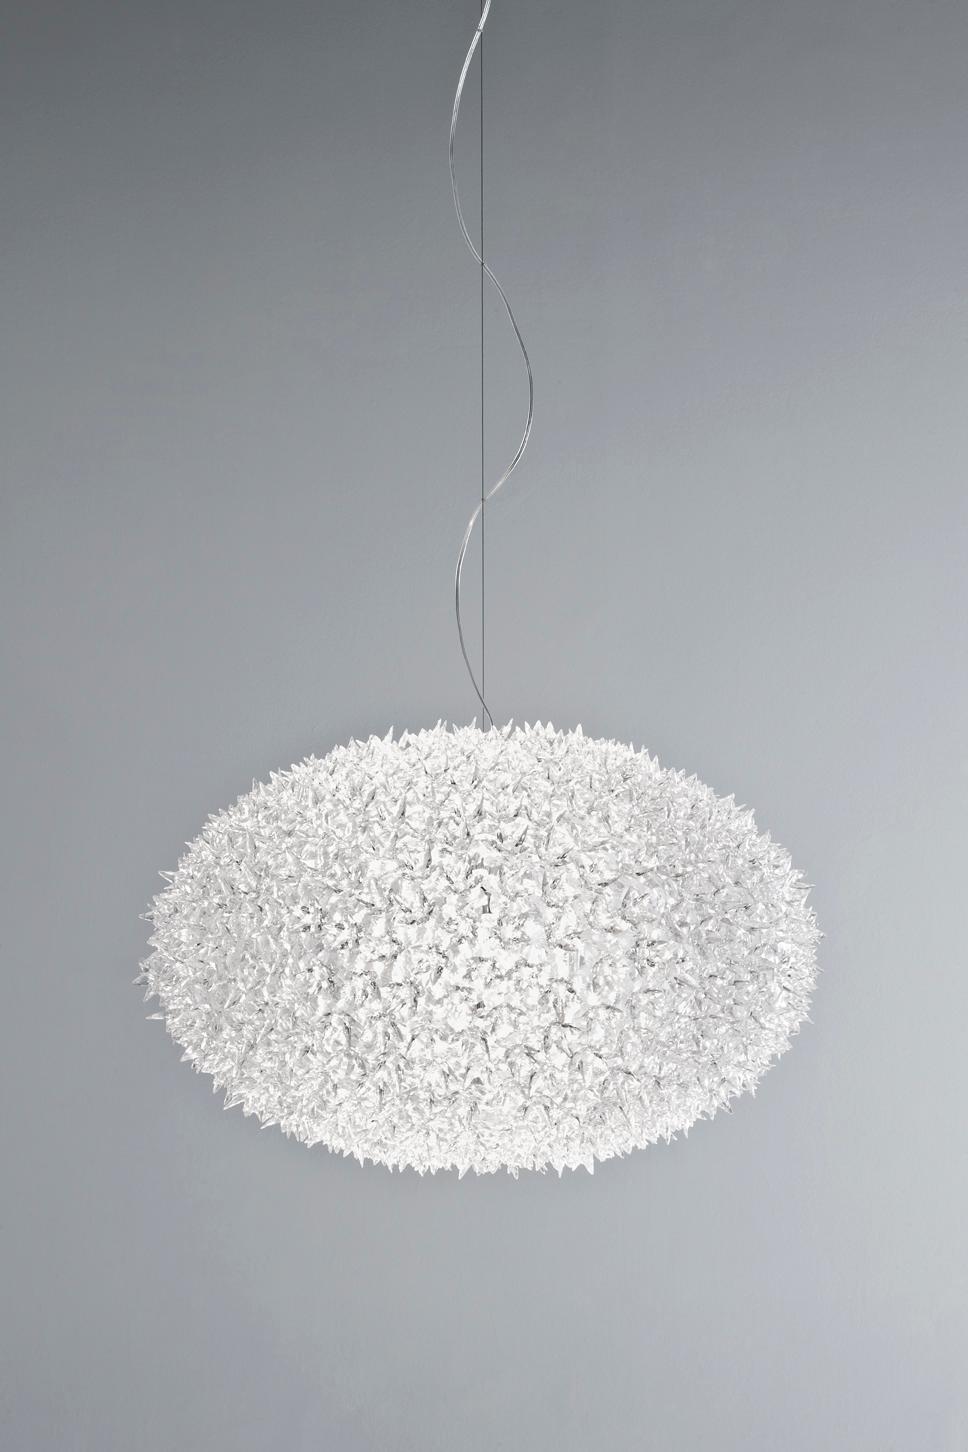 The Bloom New lamp family with its elliptical shape and distinctive original structure covered by sparkling polycarbonate flowers as pure and precious as crystal in hanging. As delicate as a spring bouquet, Bloom lights offer new and sophisticated